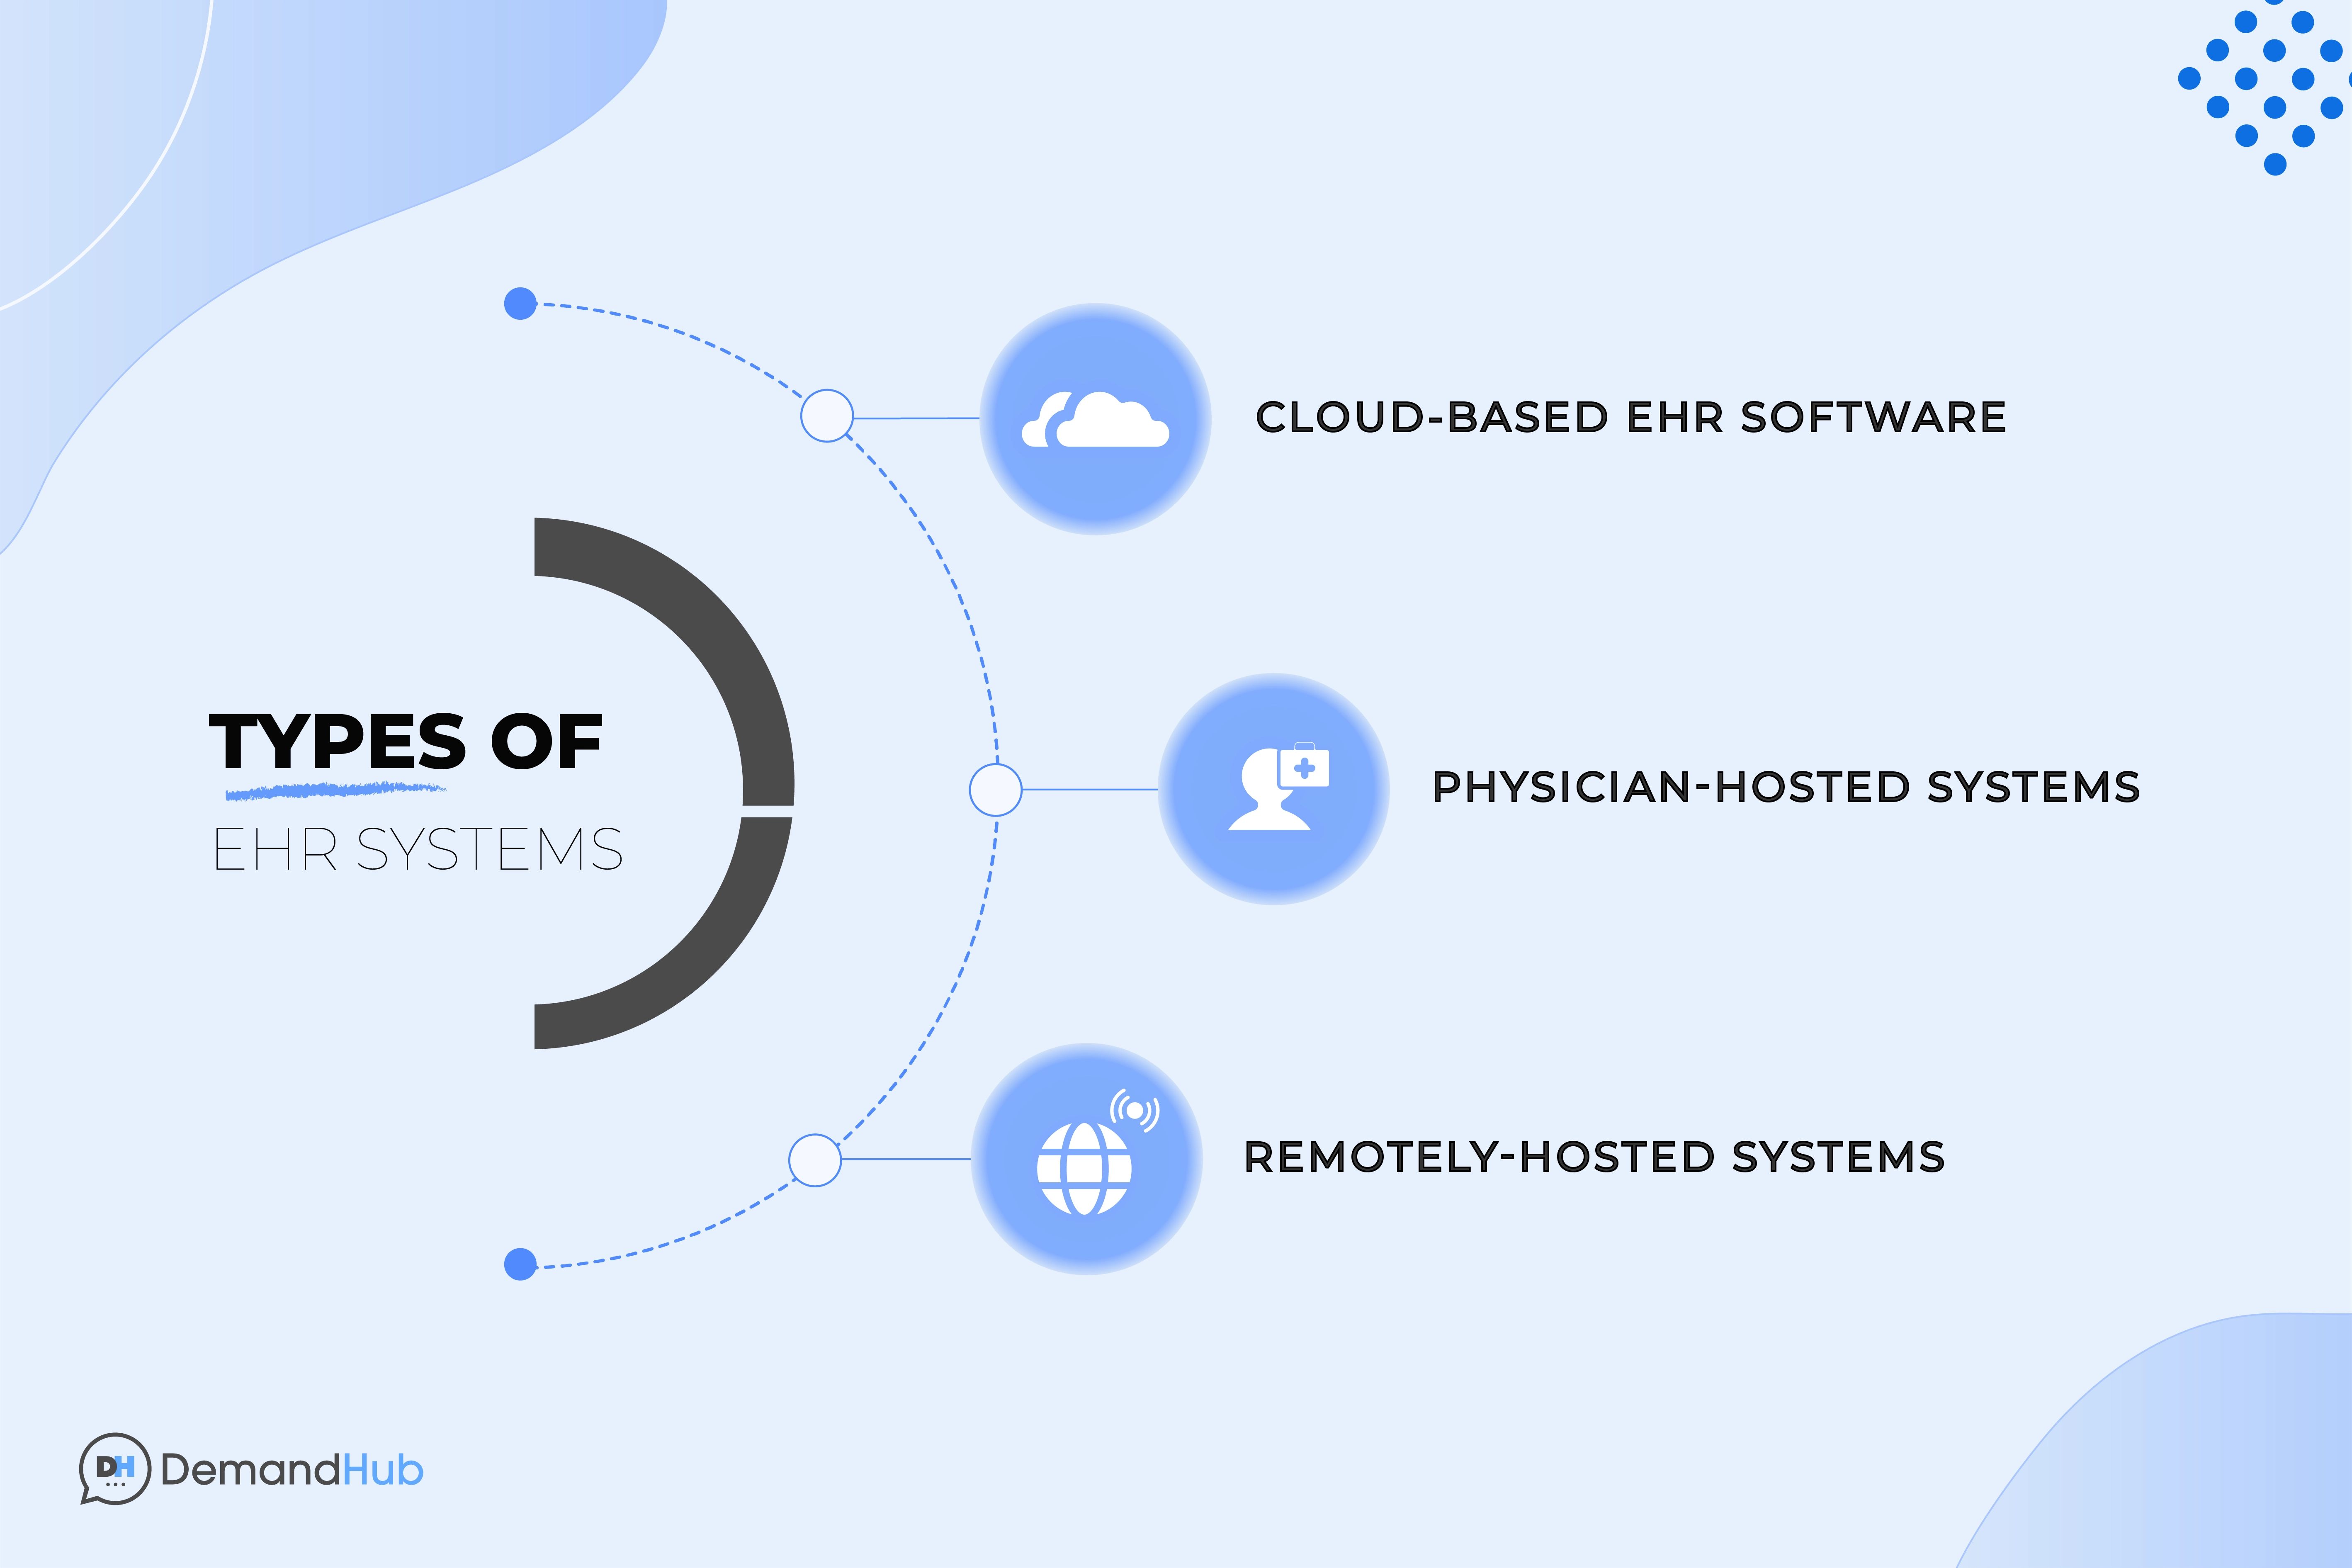 Types of EHR Systems